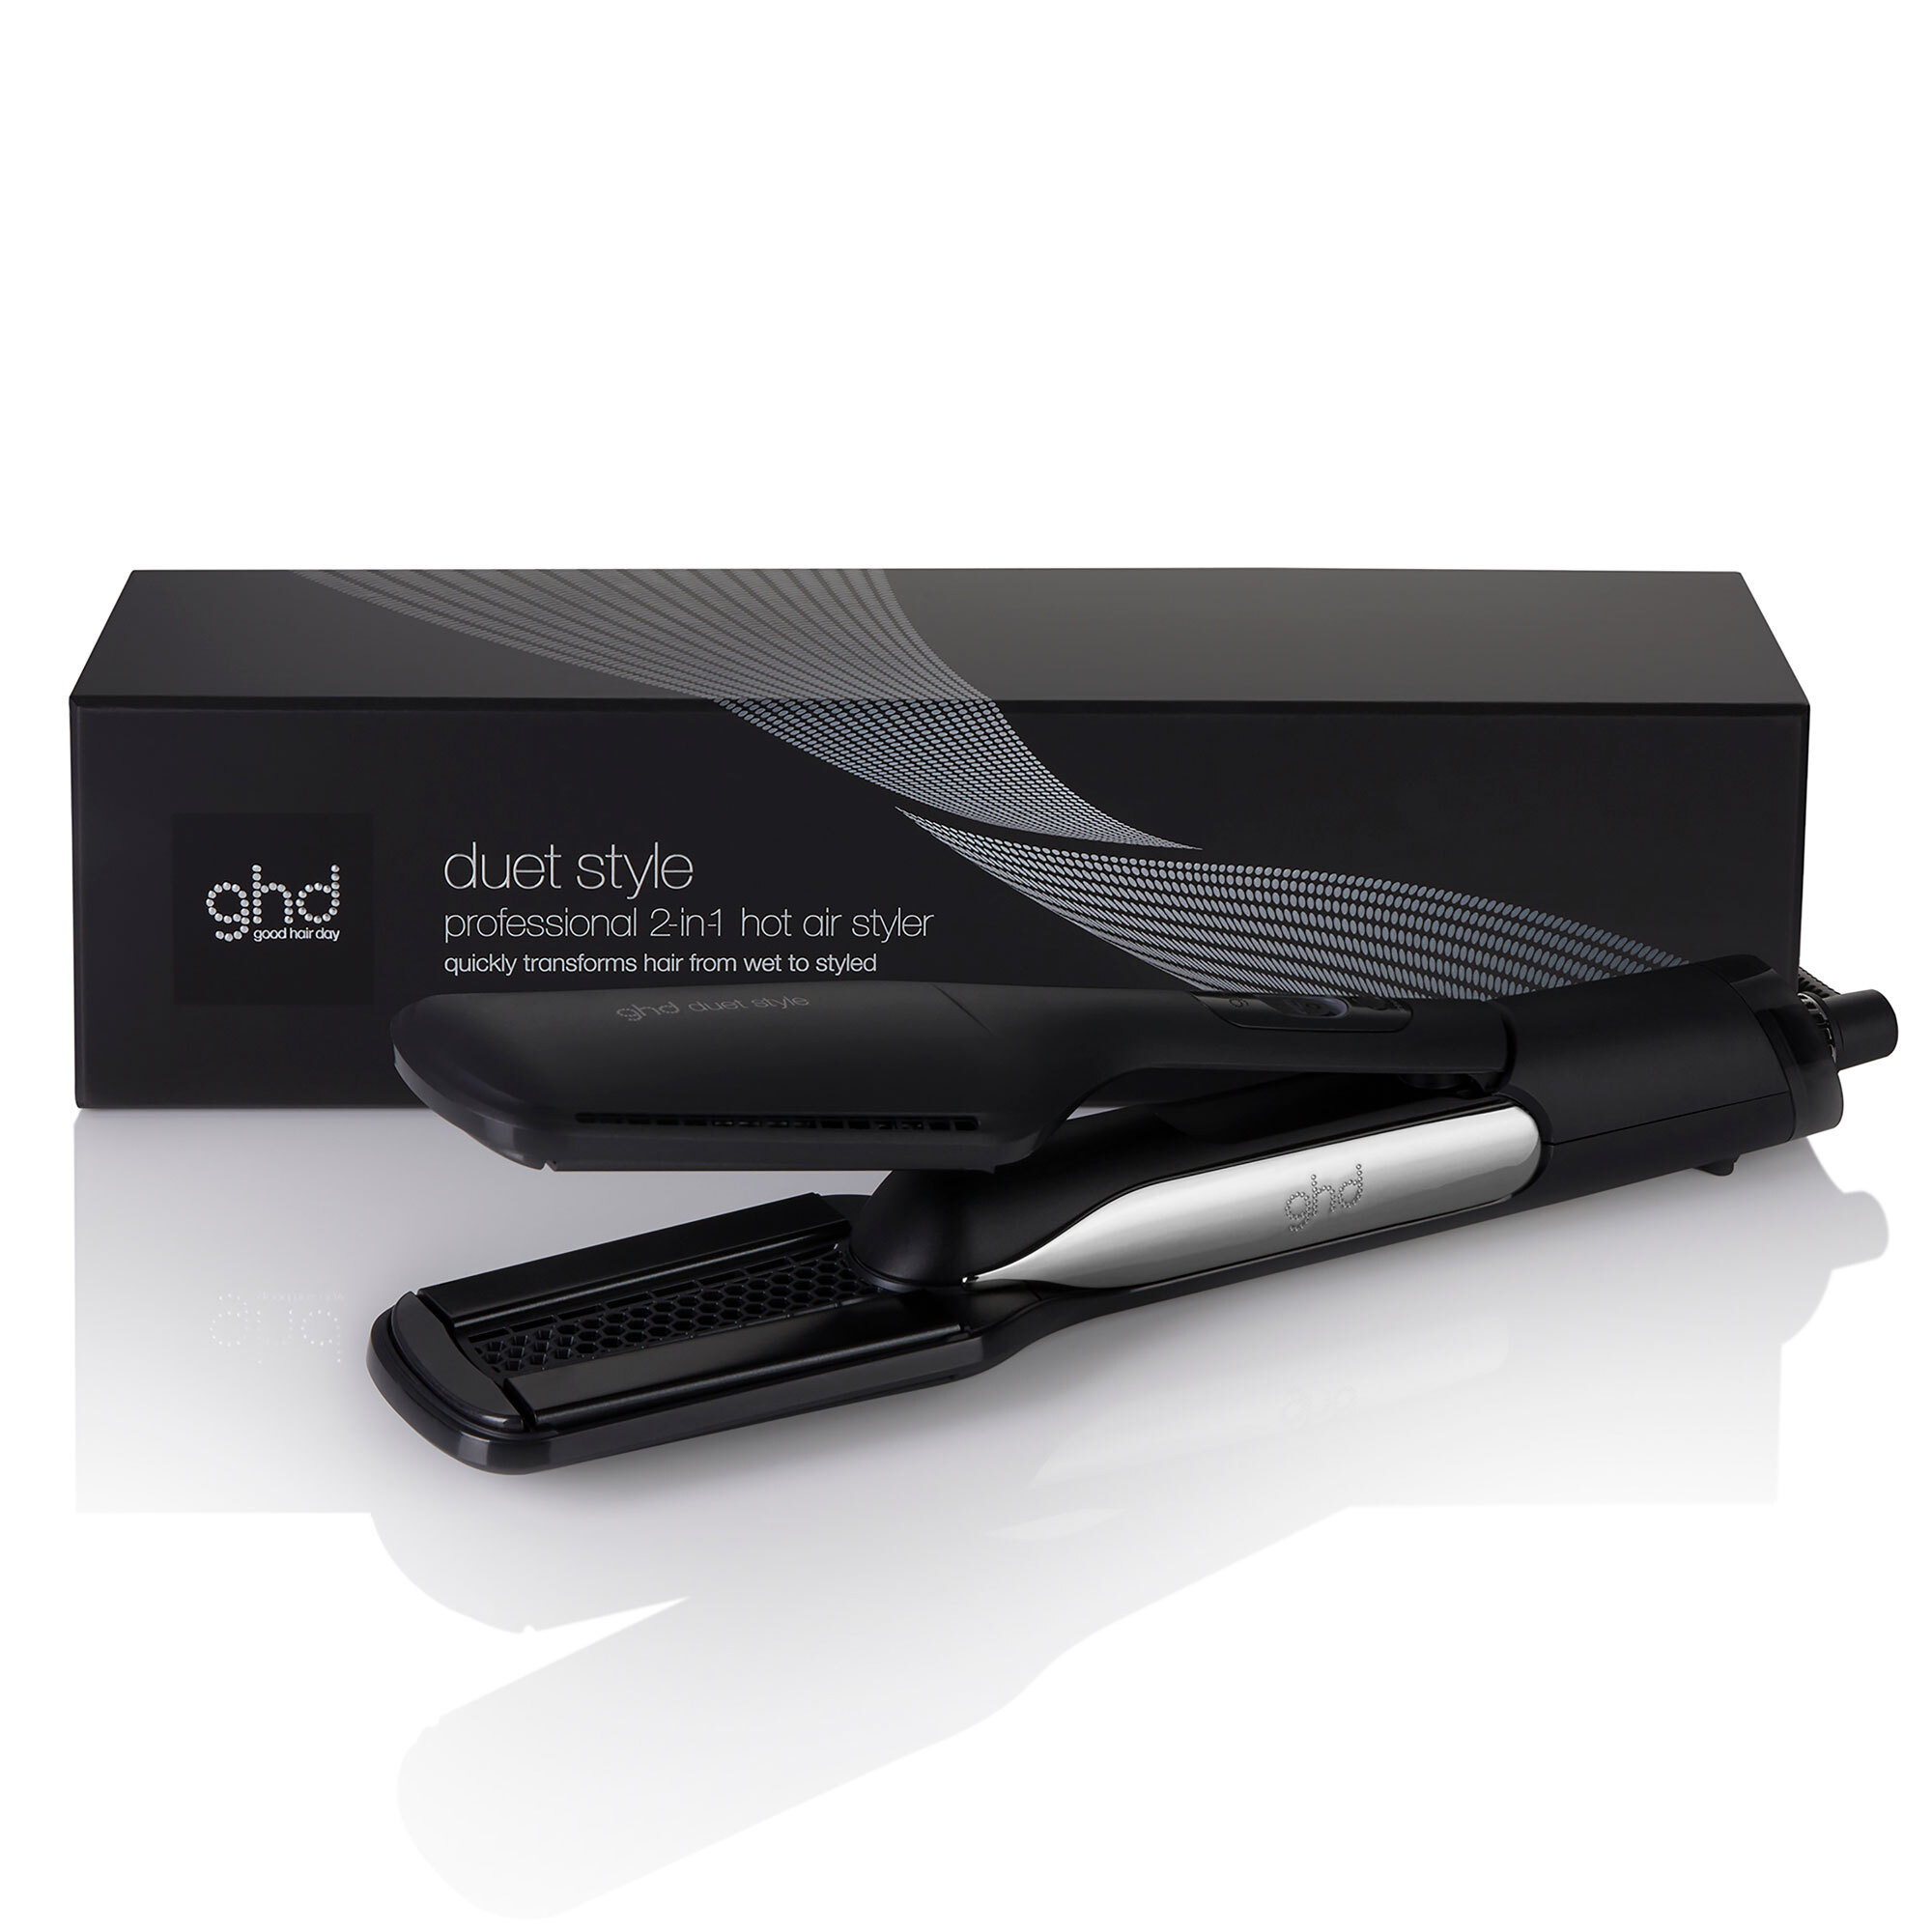 ghd Distributor Duet Style - 1 item | Ethos Beauty Partners